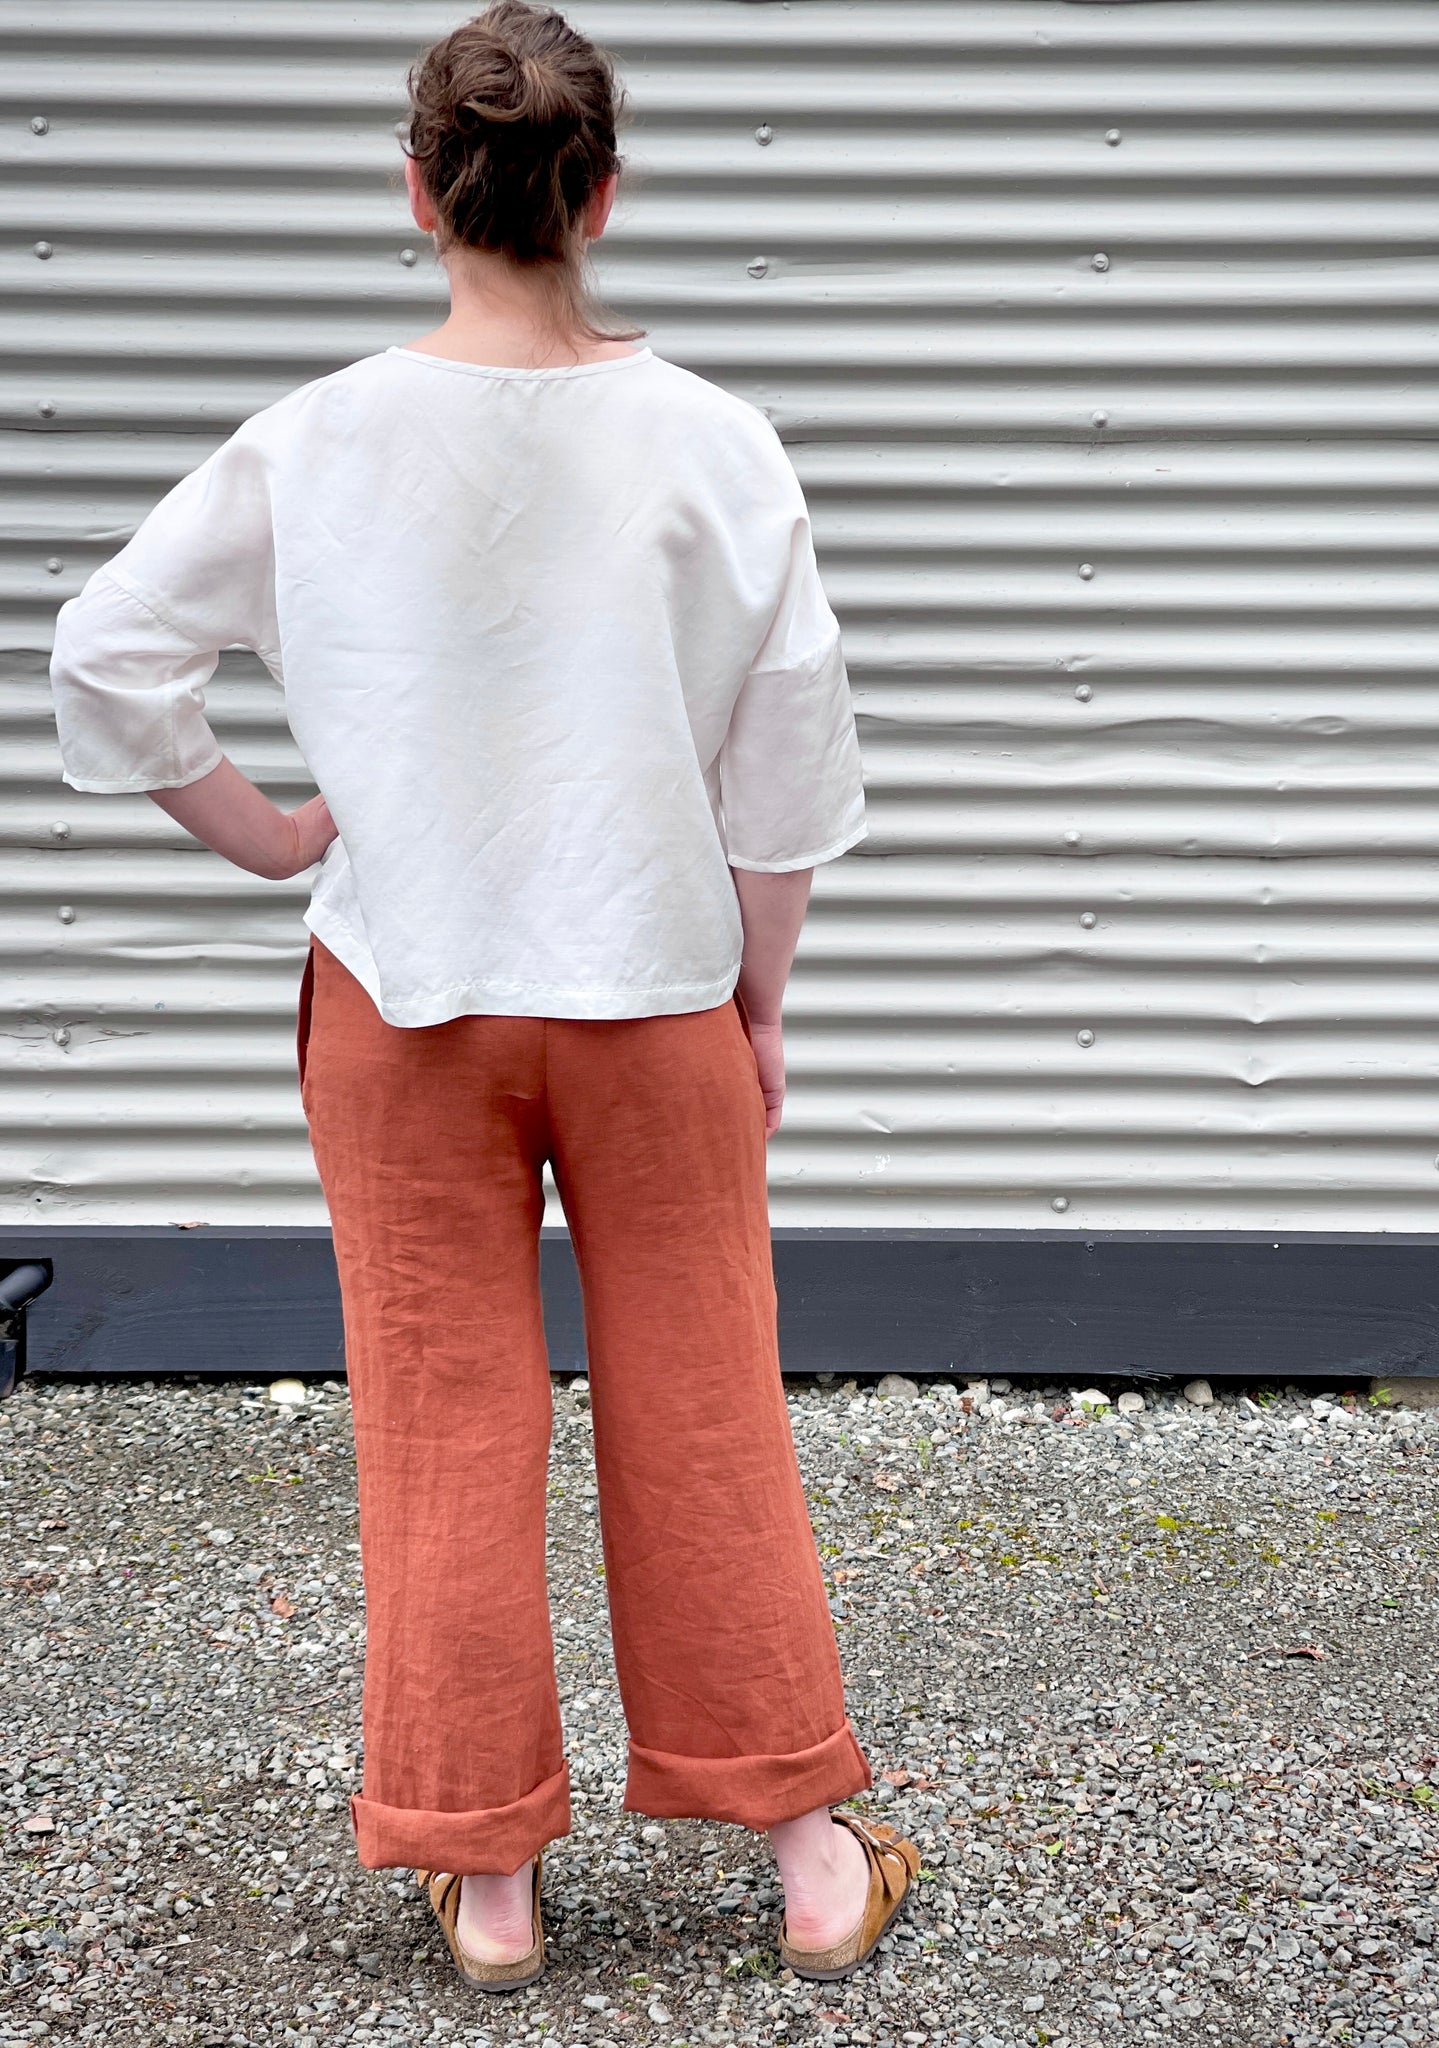 the same woman wearing the wide leg trousers and the loose white top but showing her from the back. The background is a corrugated iron wall  